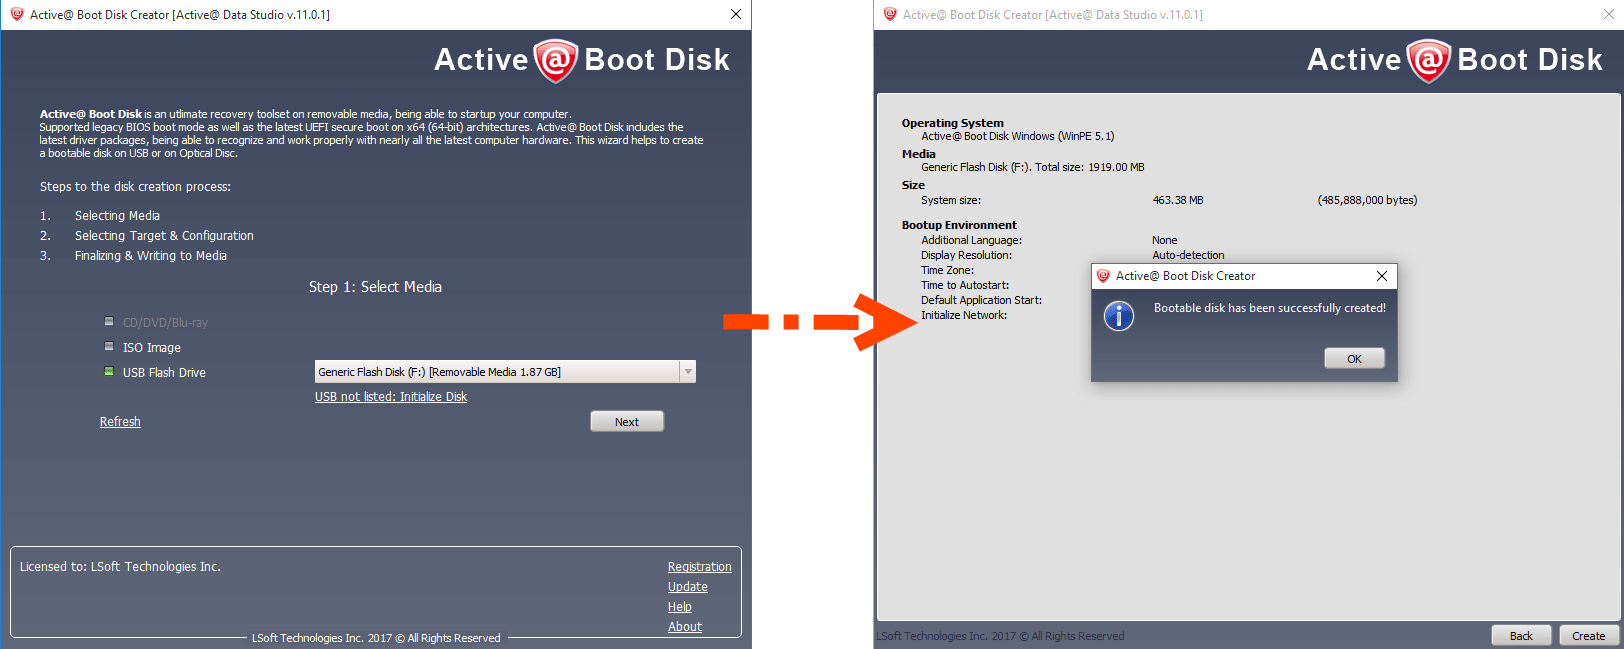 Bryde igennem resultat Ord How to place a registered Active@ Boot Disk product into a Windows PE image  for use in a network PXE boot environment? – LSoft Technologies